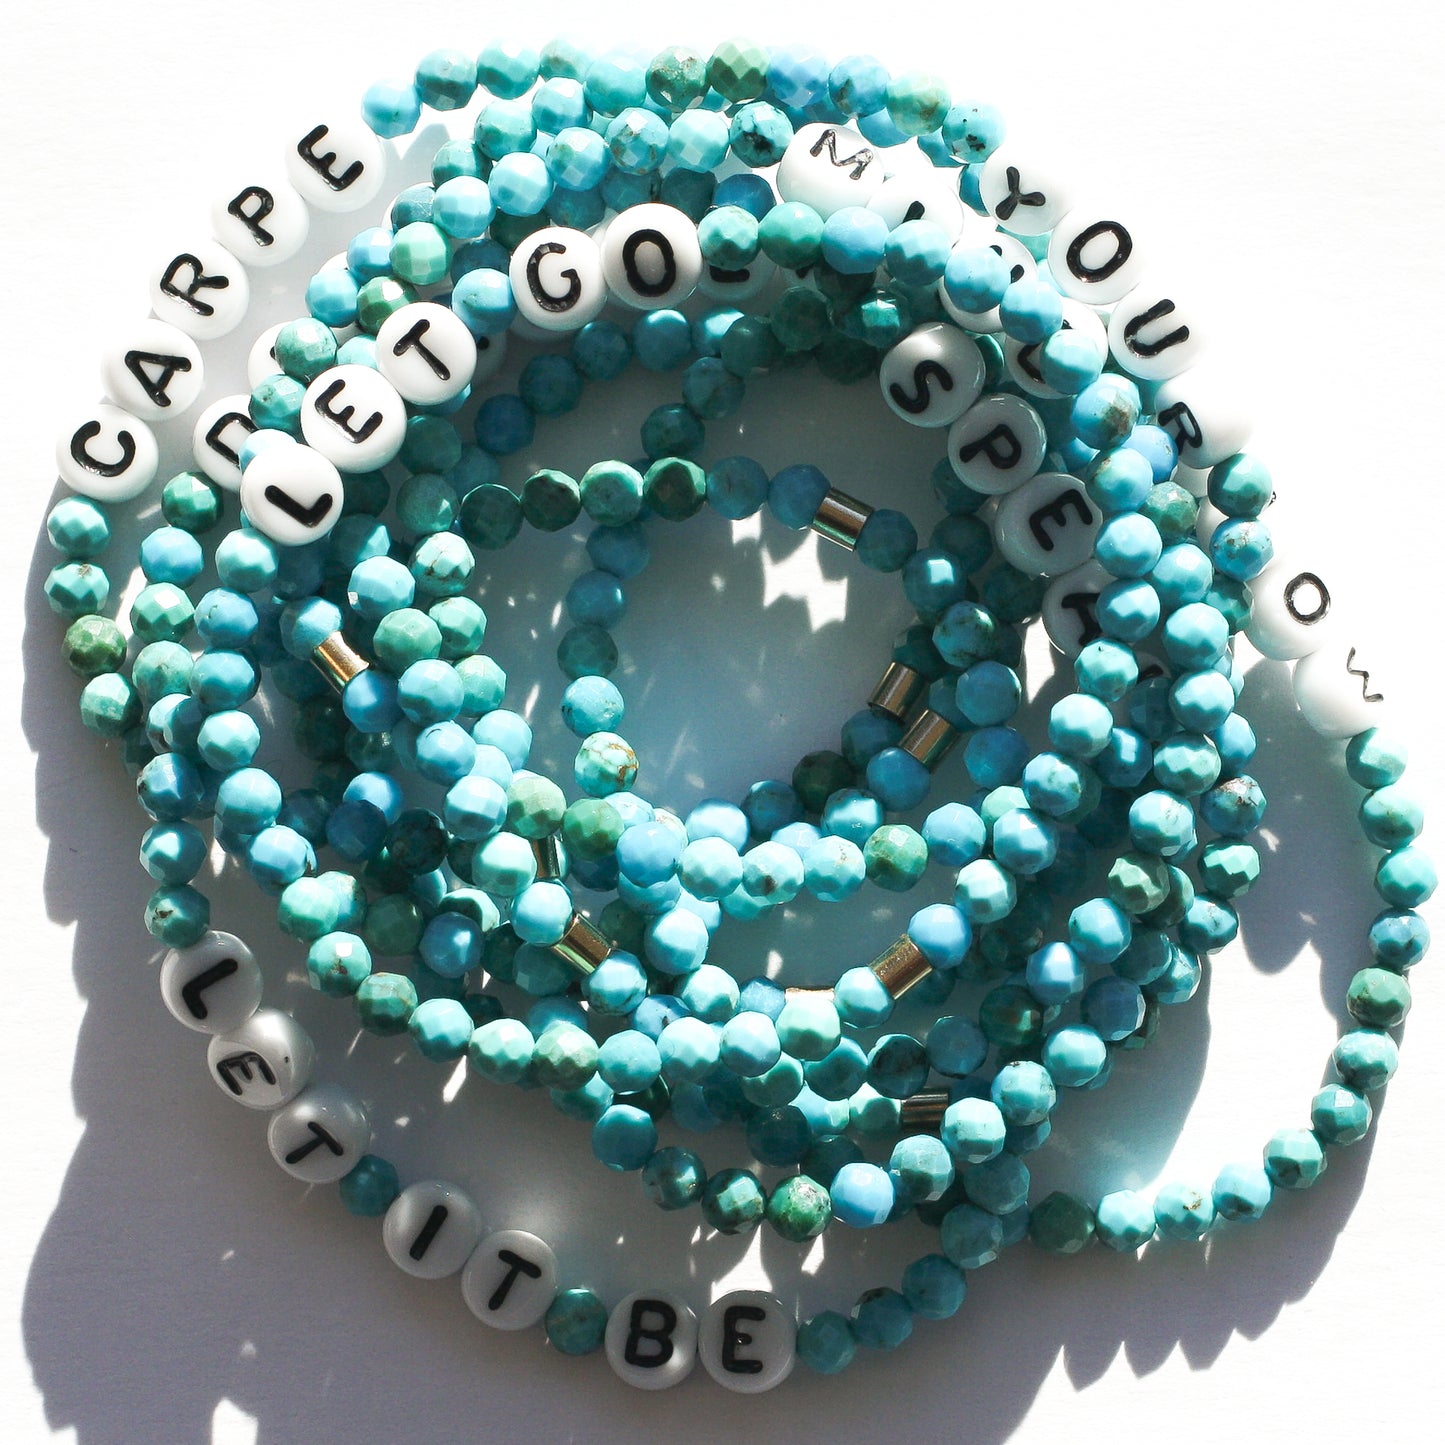 LET GO in Turquoise